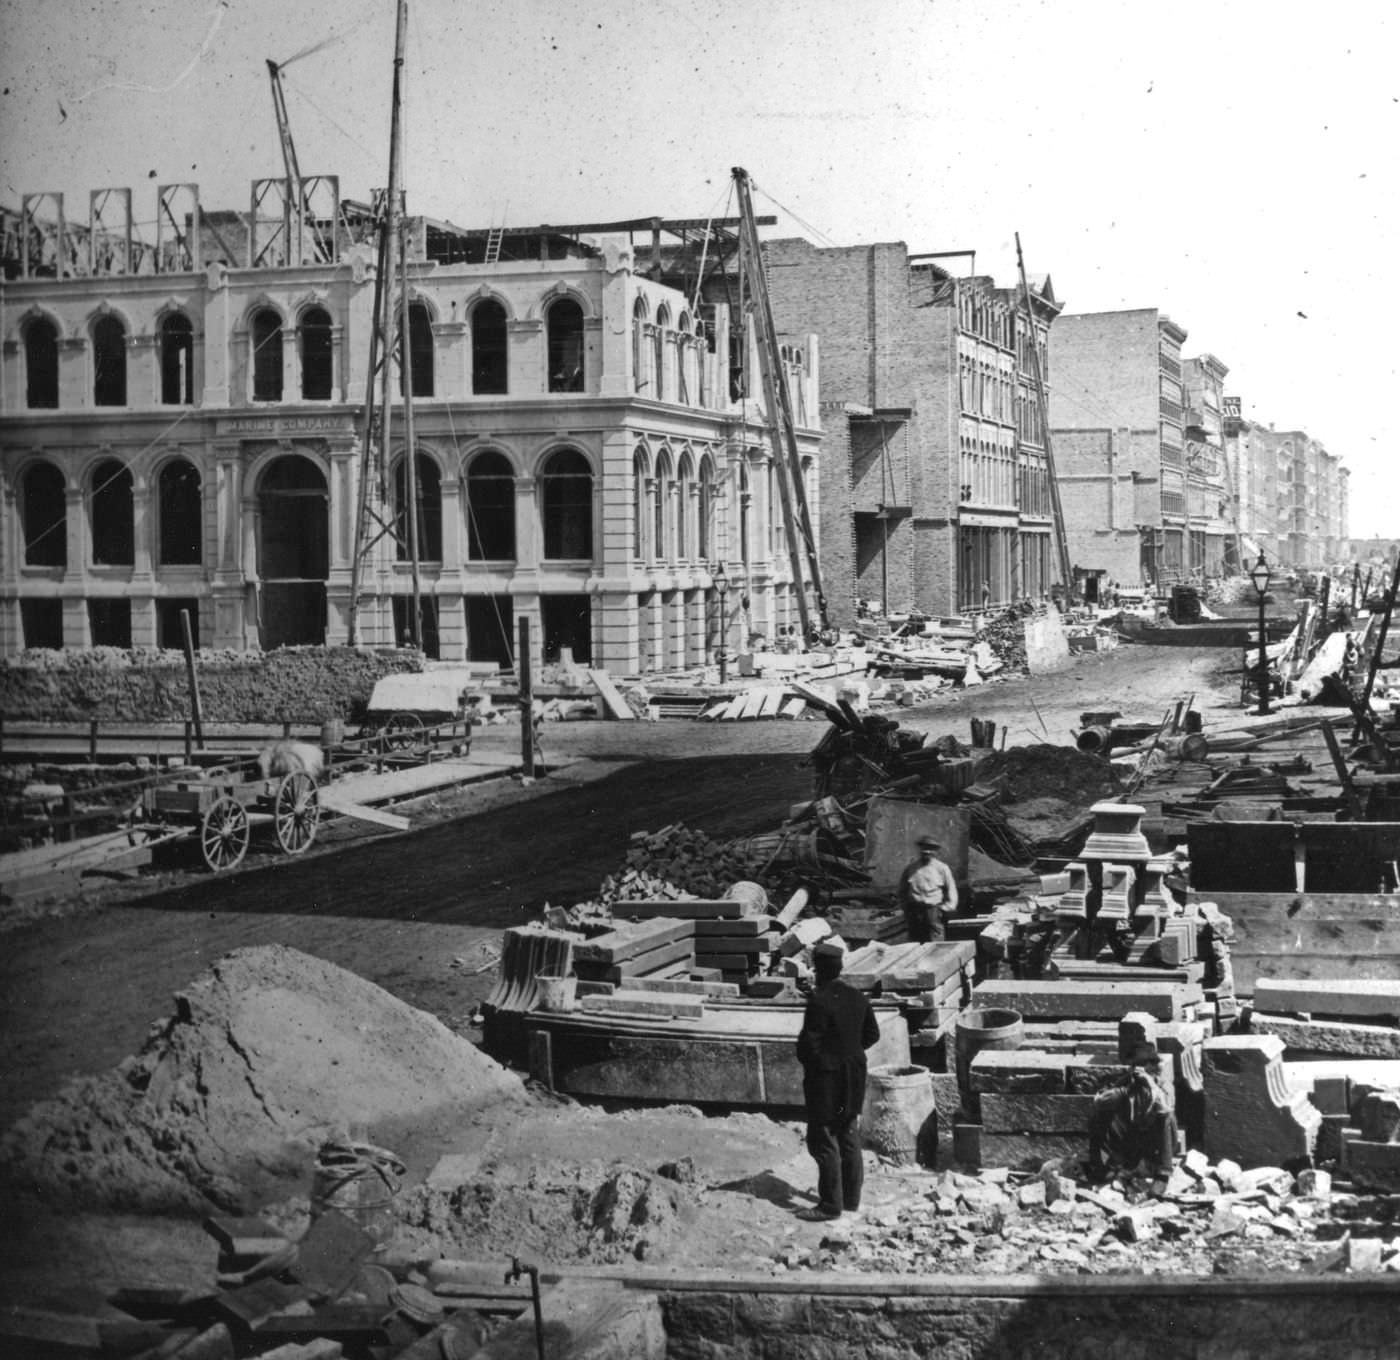 Following the Great Chicago Fire of 1871, rebuilding became a priority.